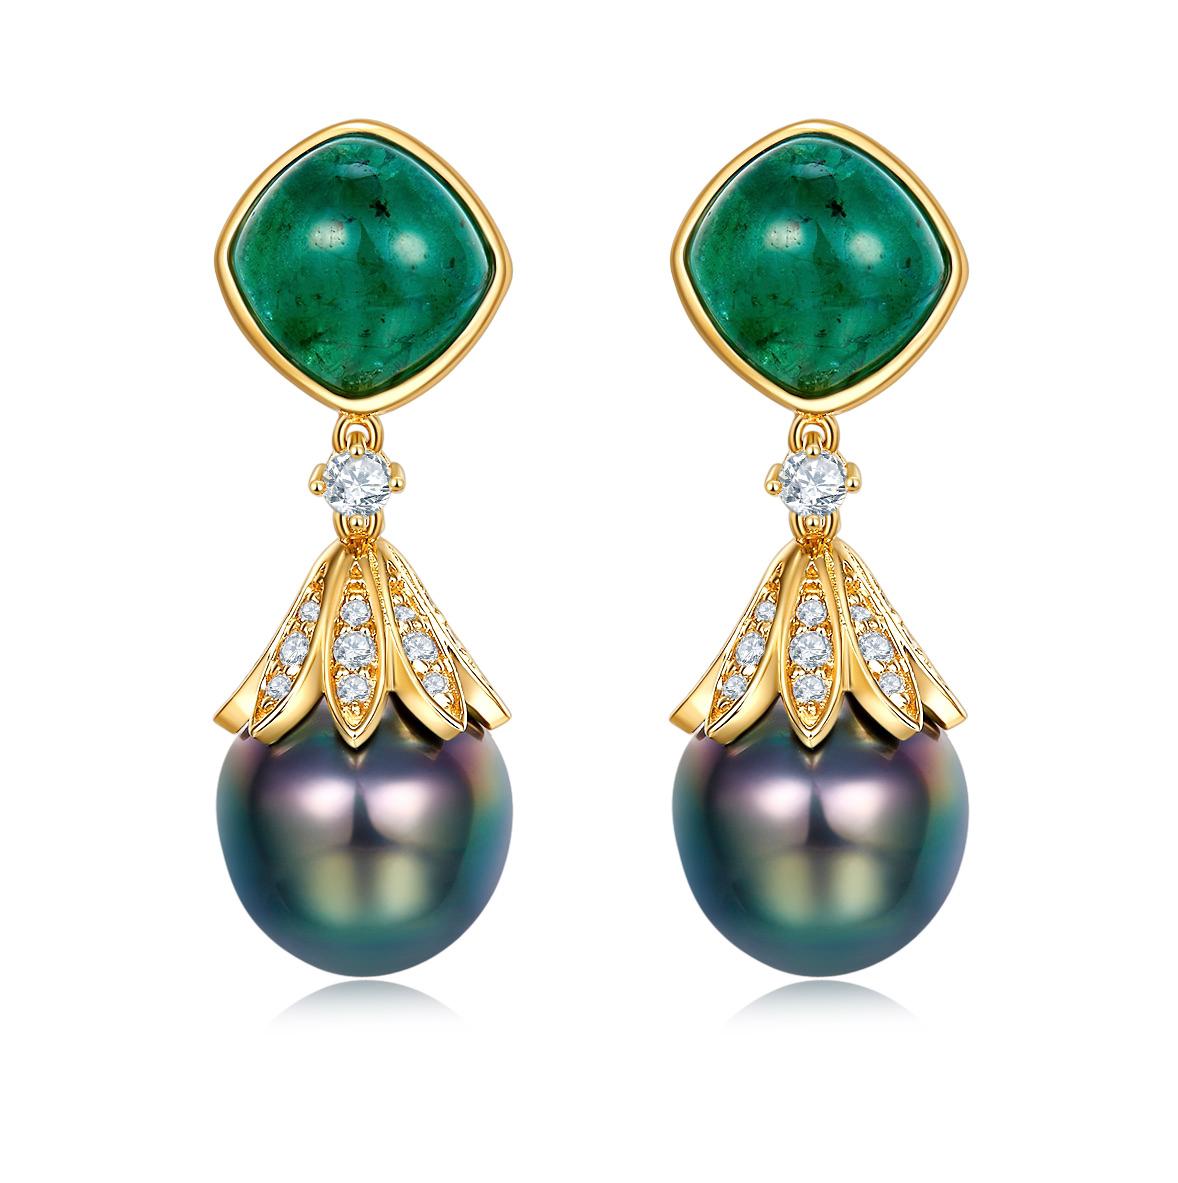 The Tahitian pearls are suspended below Diamond Shape Emerald Cabochon with Diamond pave throughout the Earring. Yellow Gold is used to outlined the Emerald to elevate the colour of the Emerald as yellow is the perfect match for green. 

The